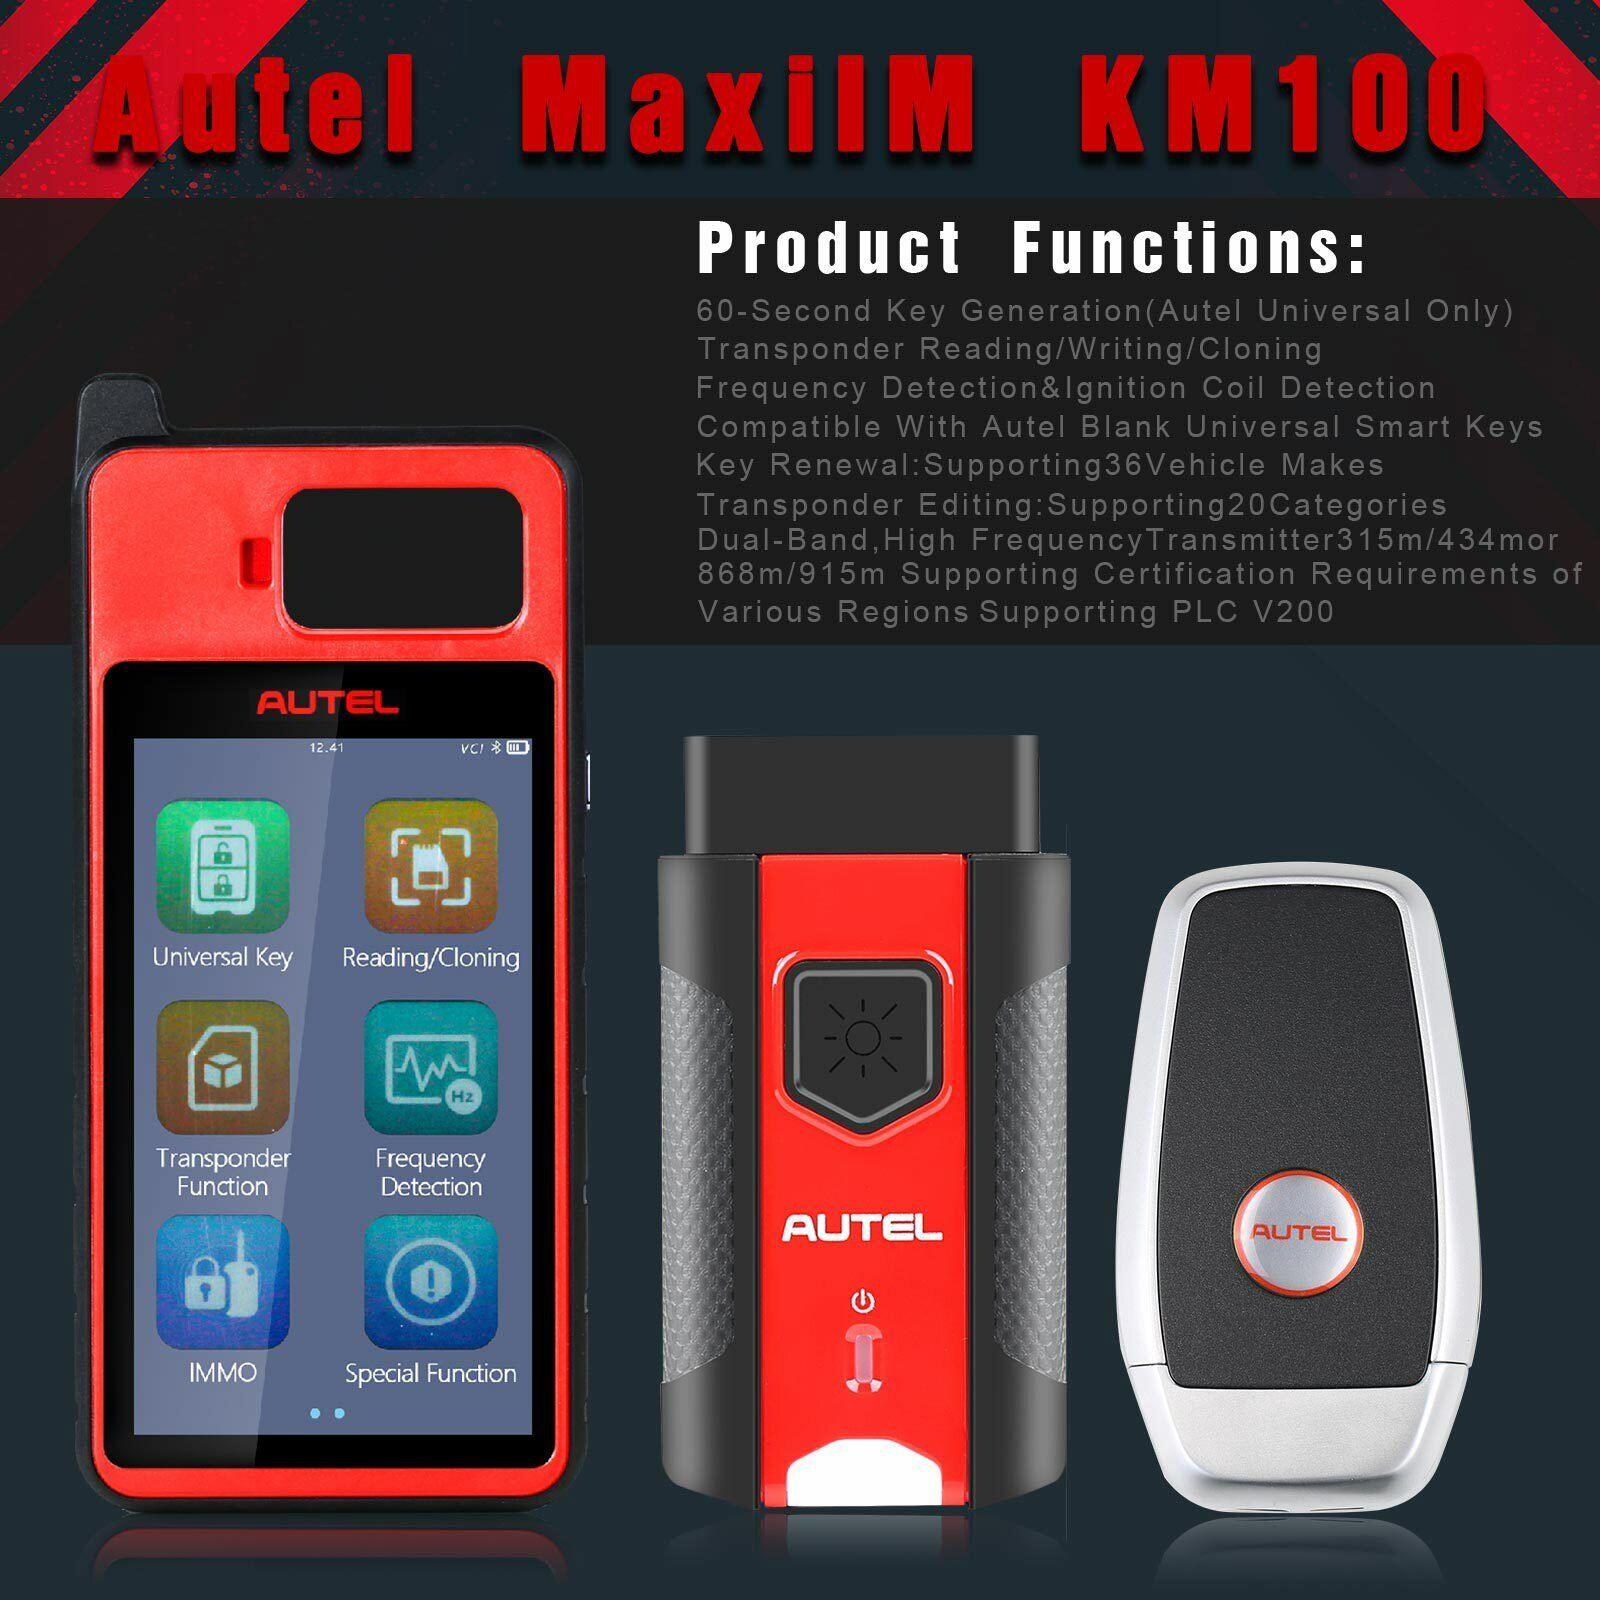 Autel MaxiIM KM100 immobilizer touch screen tablet - Office Catch